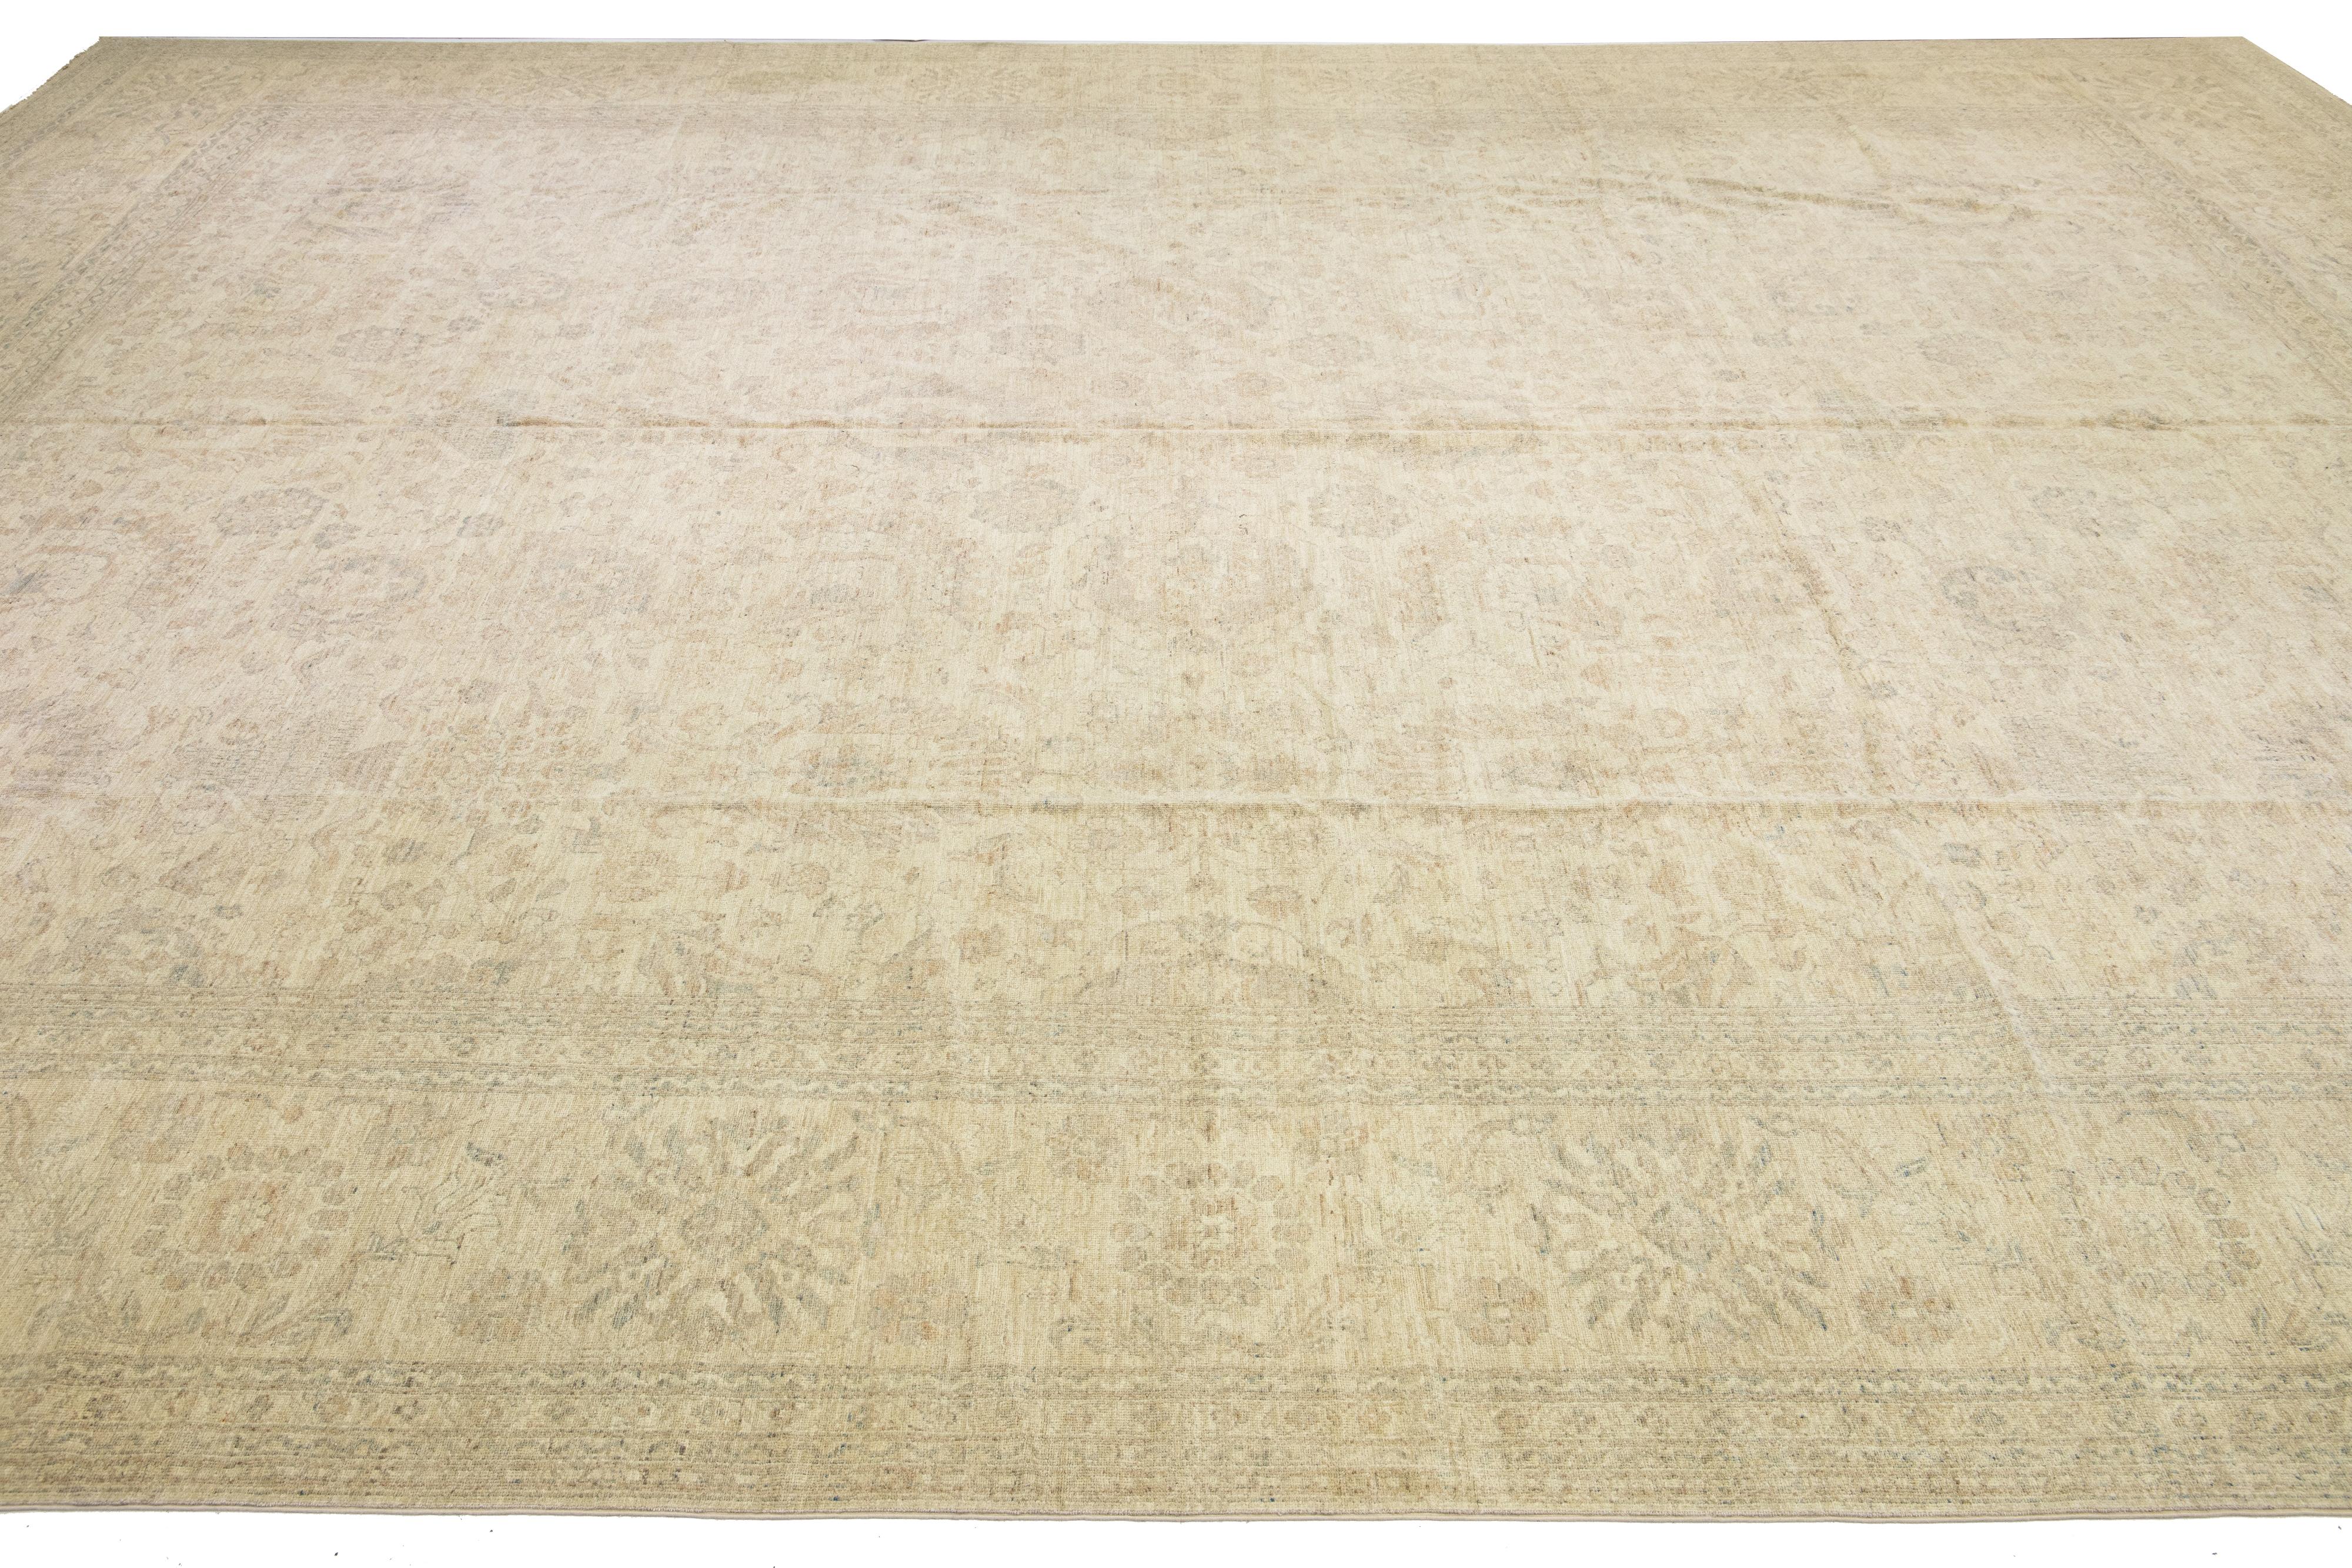 This remarkable contemporary Indian wool rug boasts a magnificent palace size, adorned with a warm beige field and intricate blue floral motifs. Its impressive dimensions measure 17' 9” x 22' 5”, perfect for adding a touch of elegance and